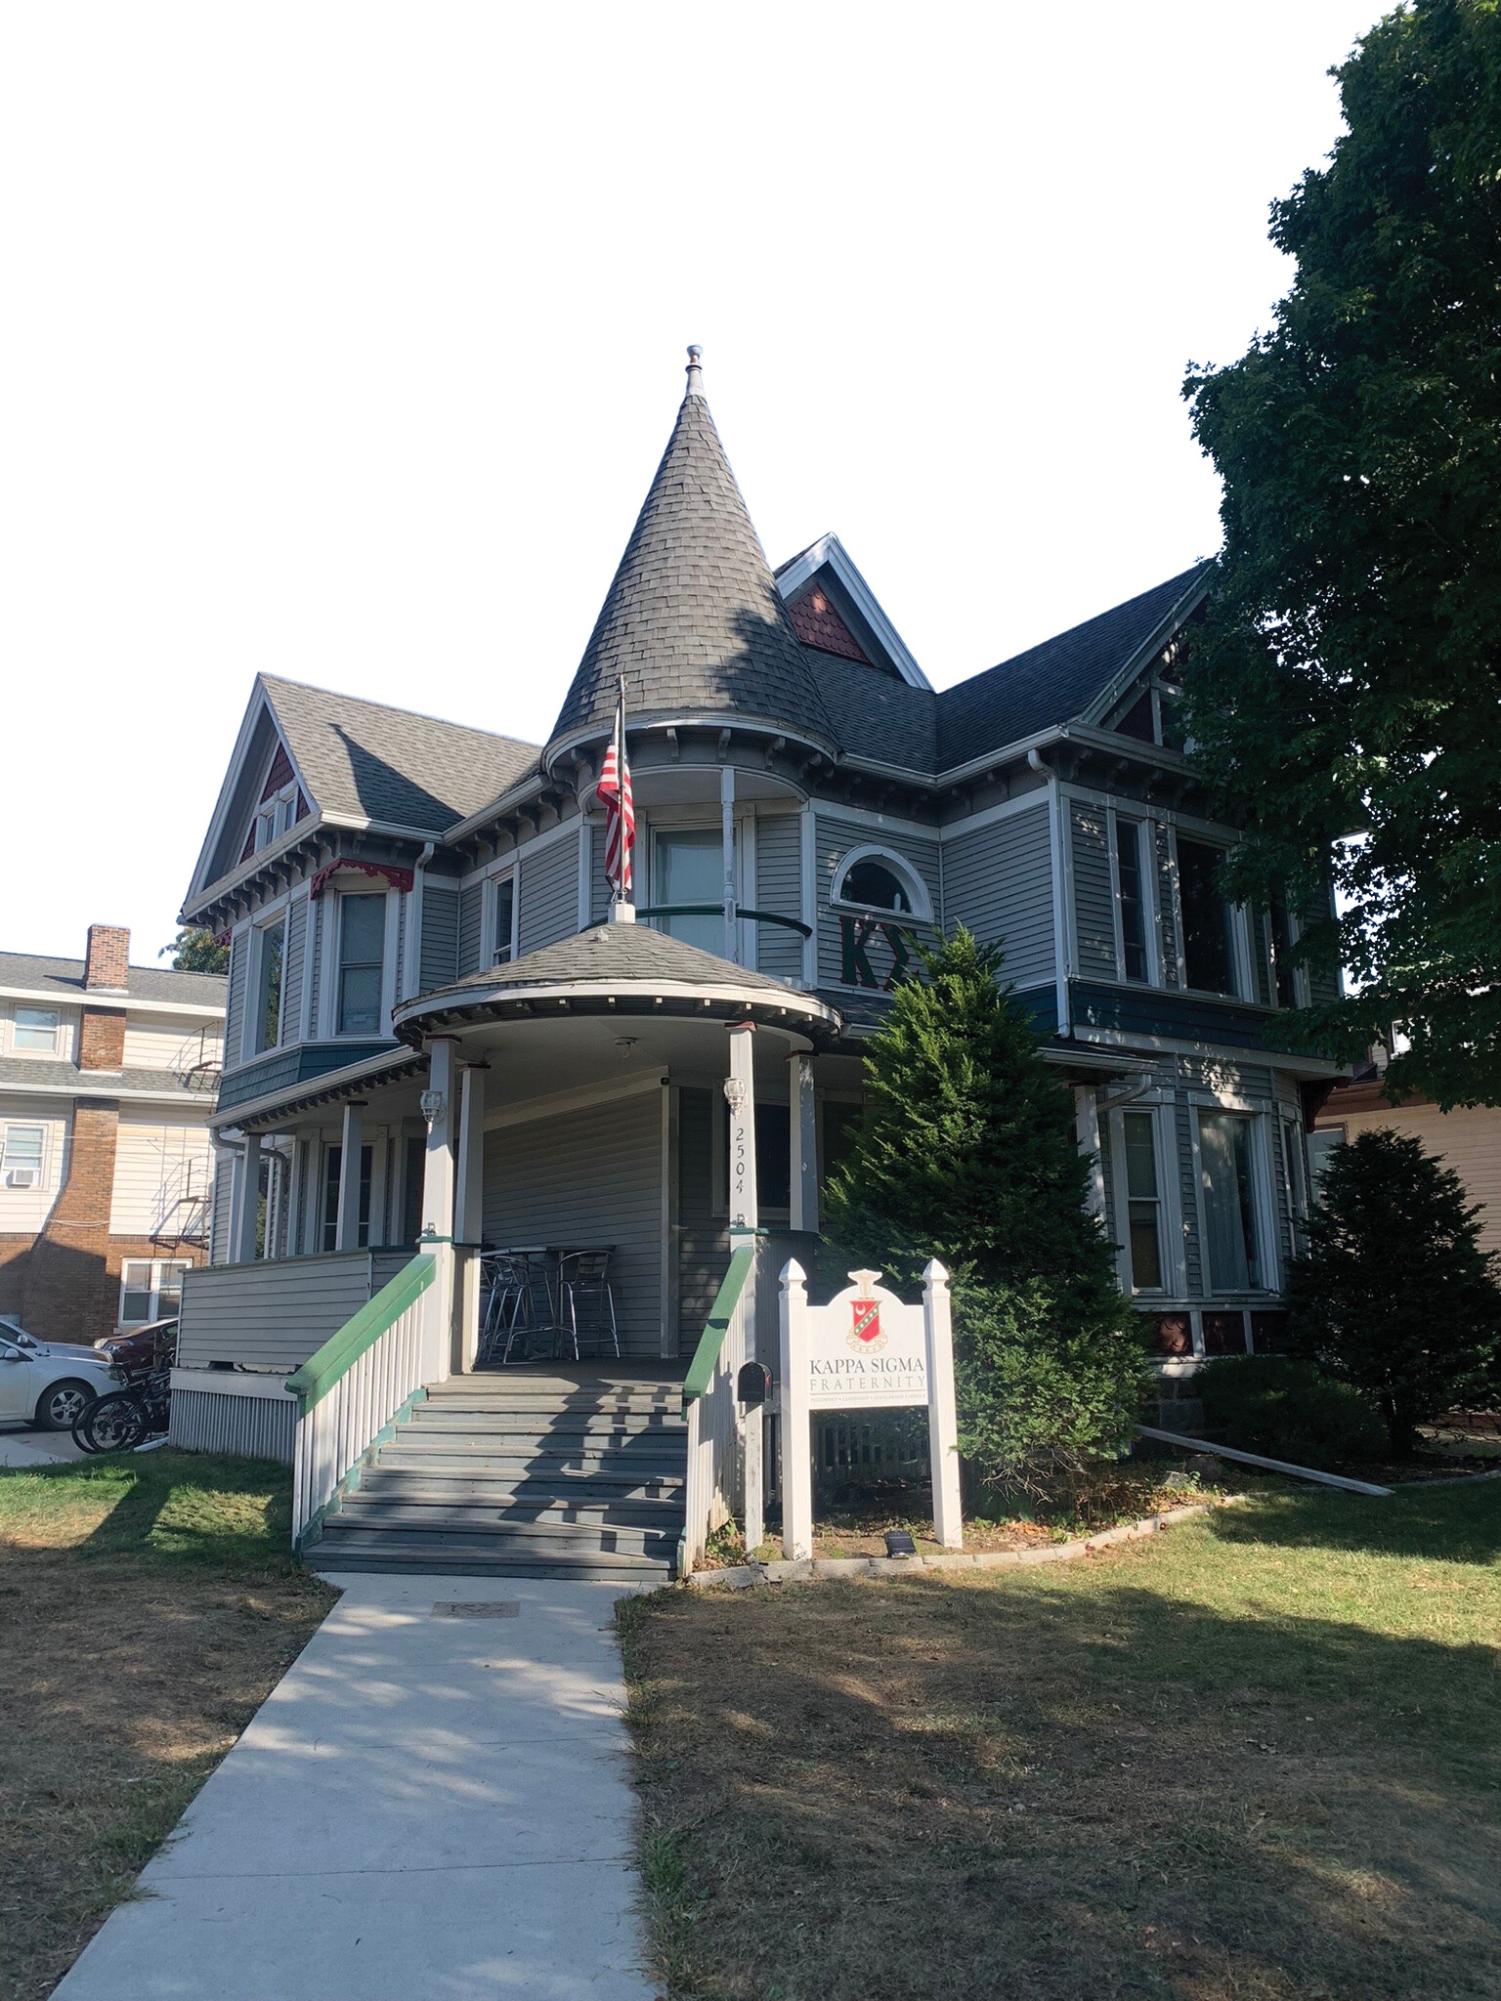 The Kappa Sigma house is located on 2504 College St., and it is home to their members as well as their philanthropic events.